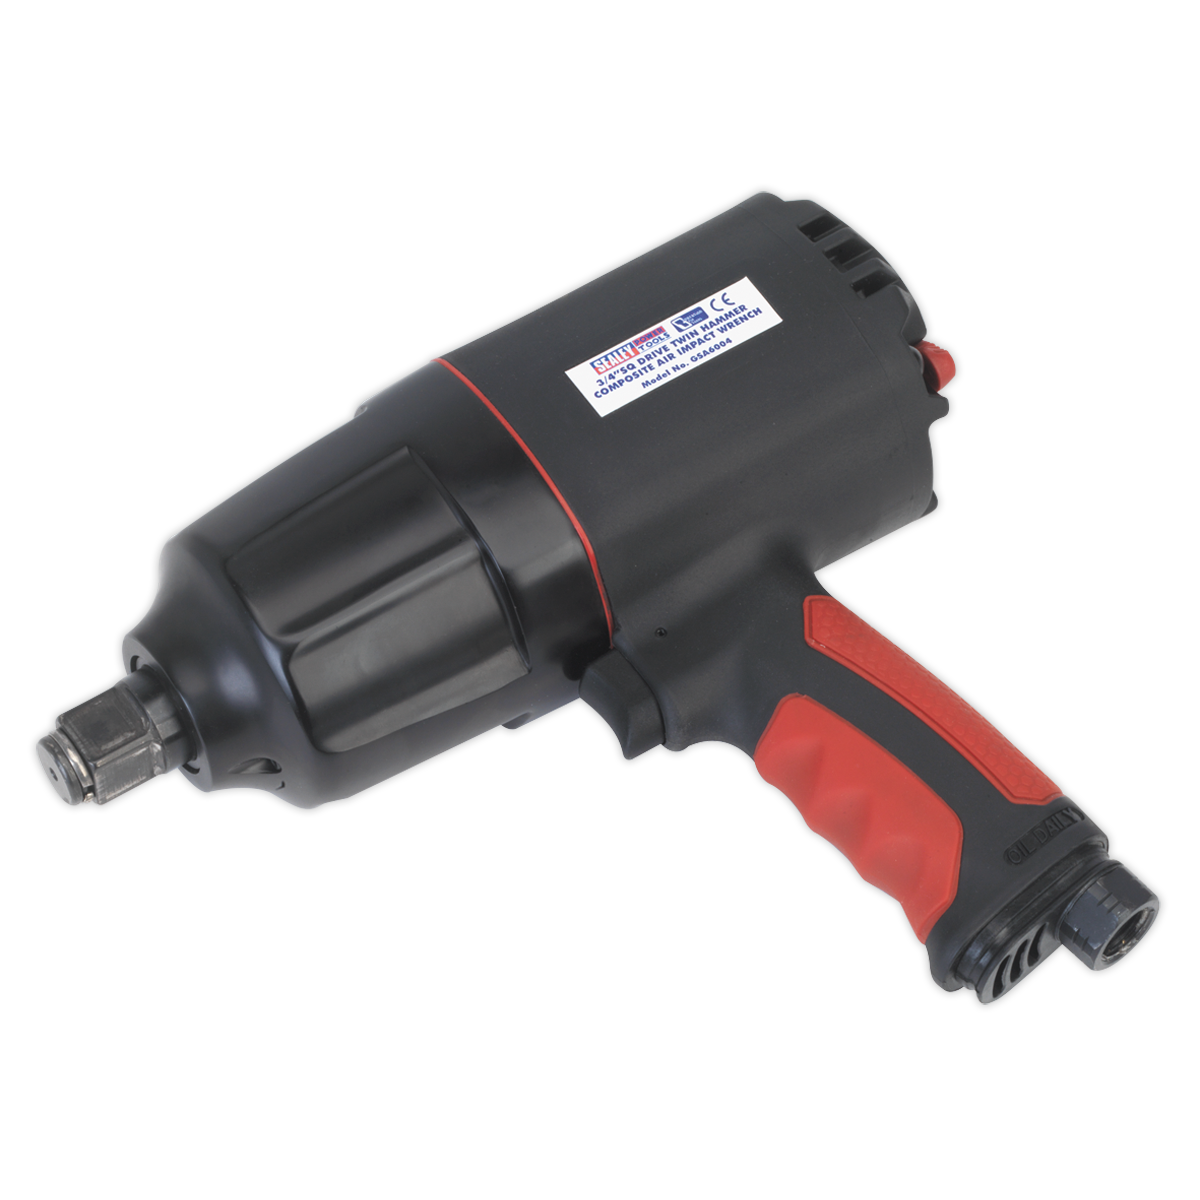 SEALEY - GSA6004 Composite Air Impact Wrench 3/4"Sq Drive - Twin Hammer